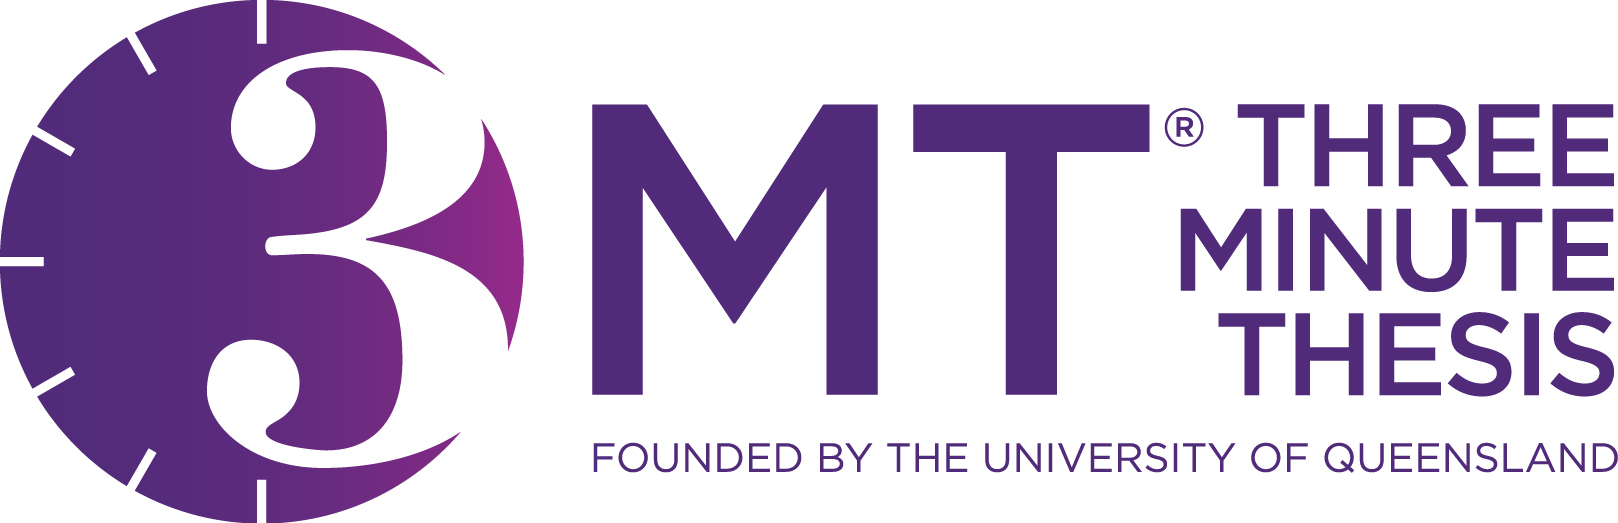 3 minute thesis logo. 